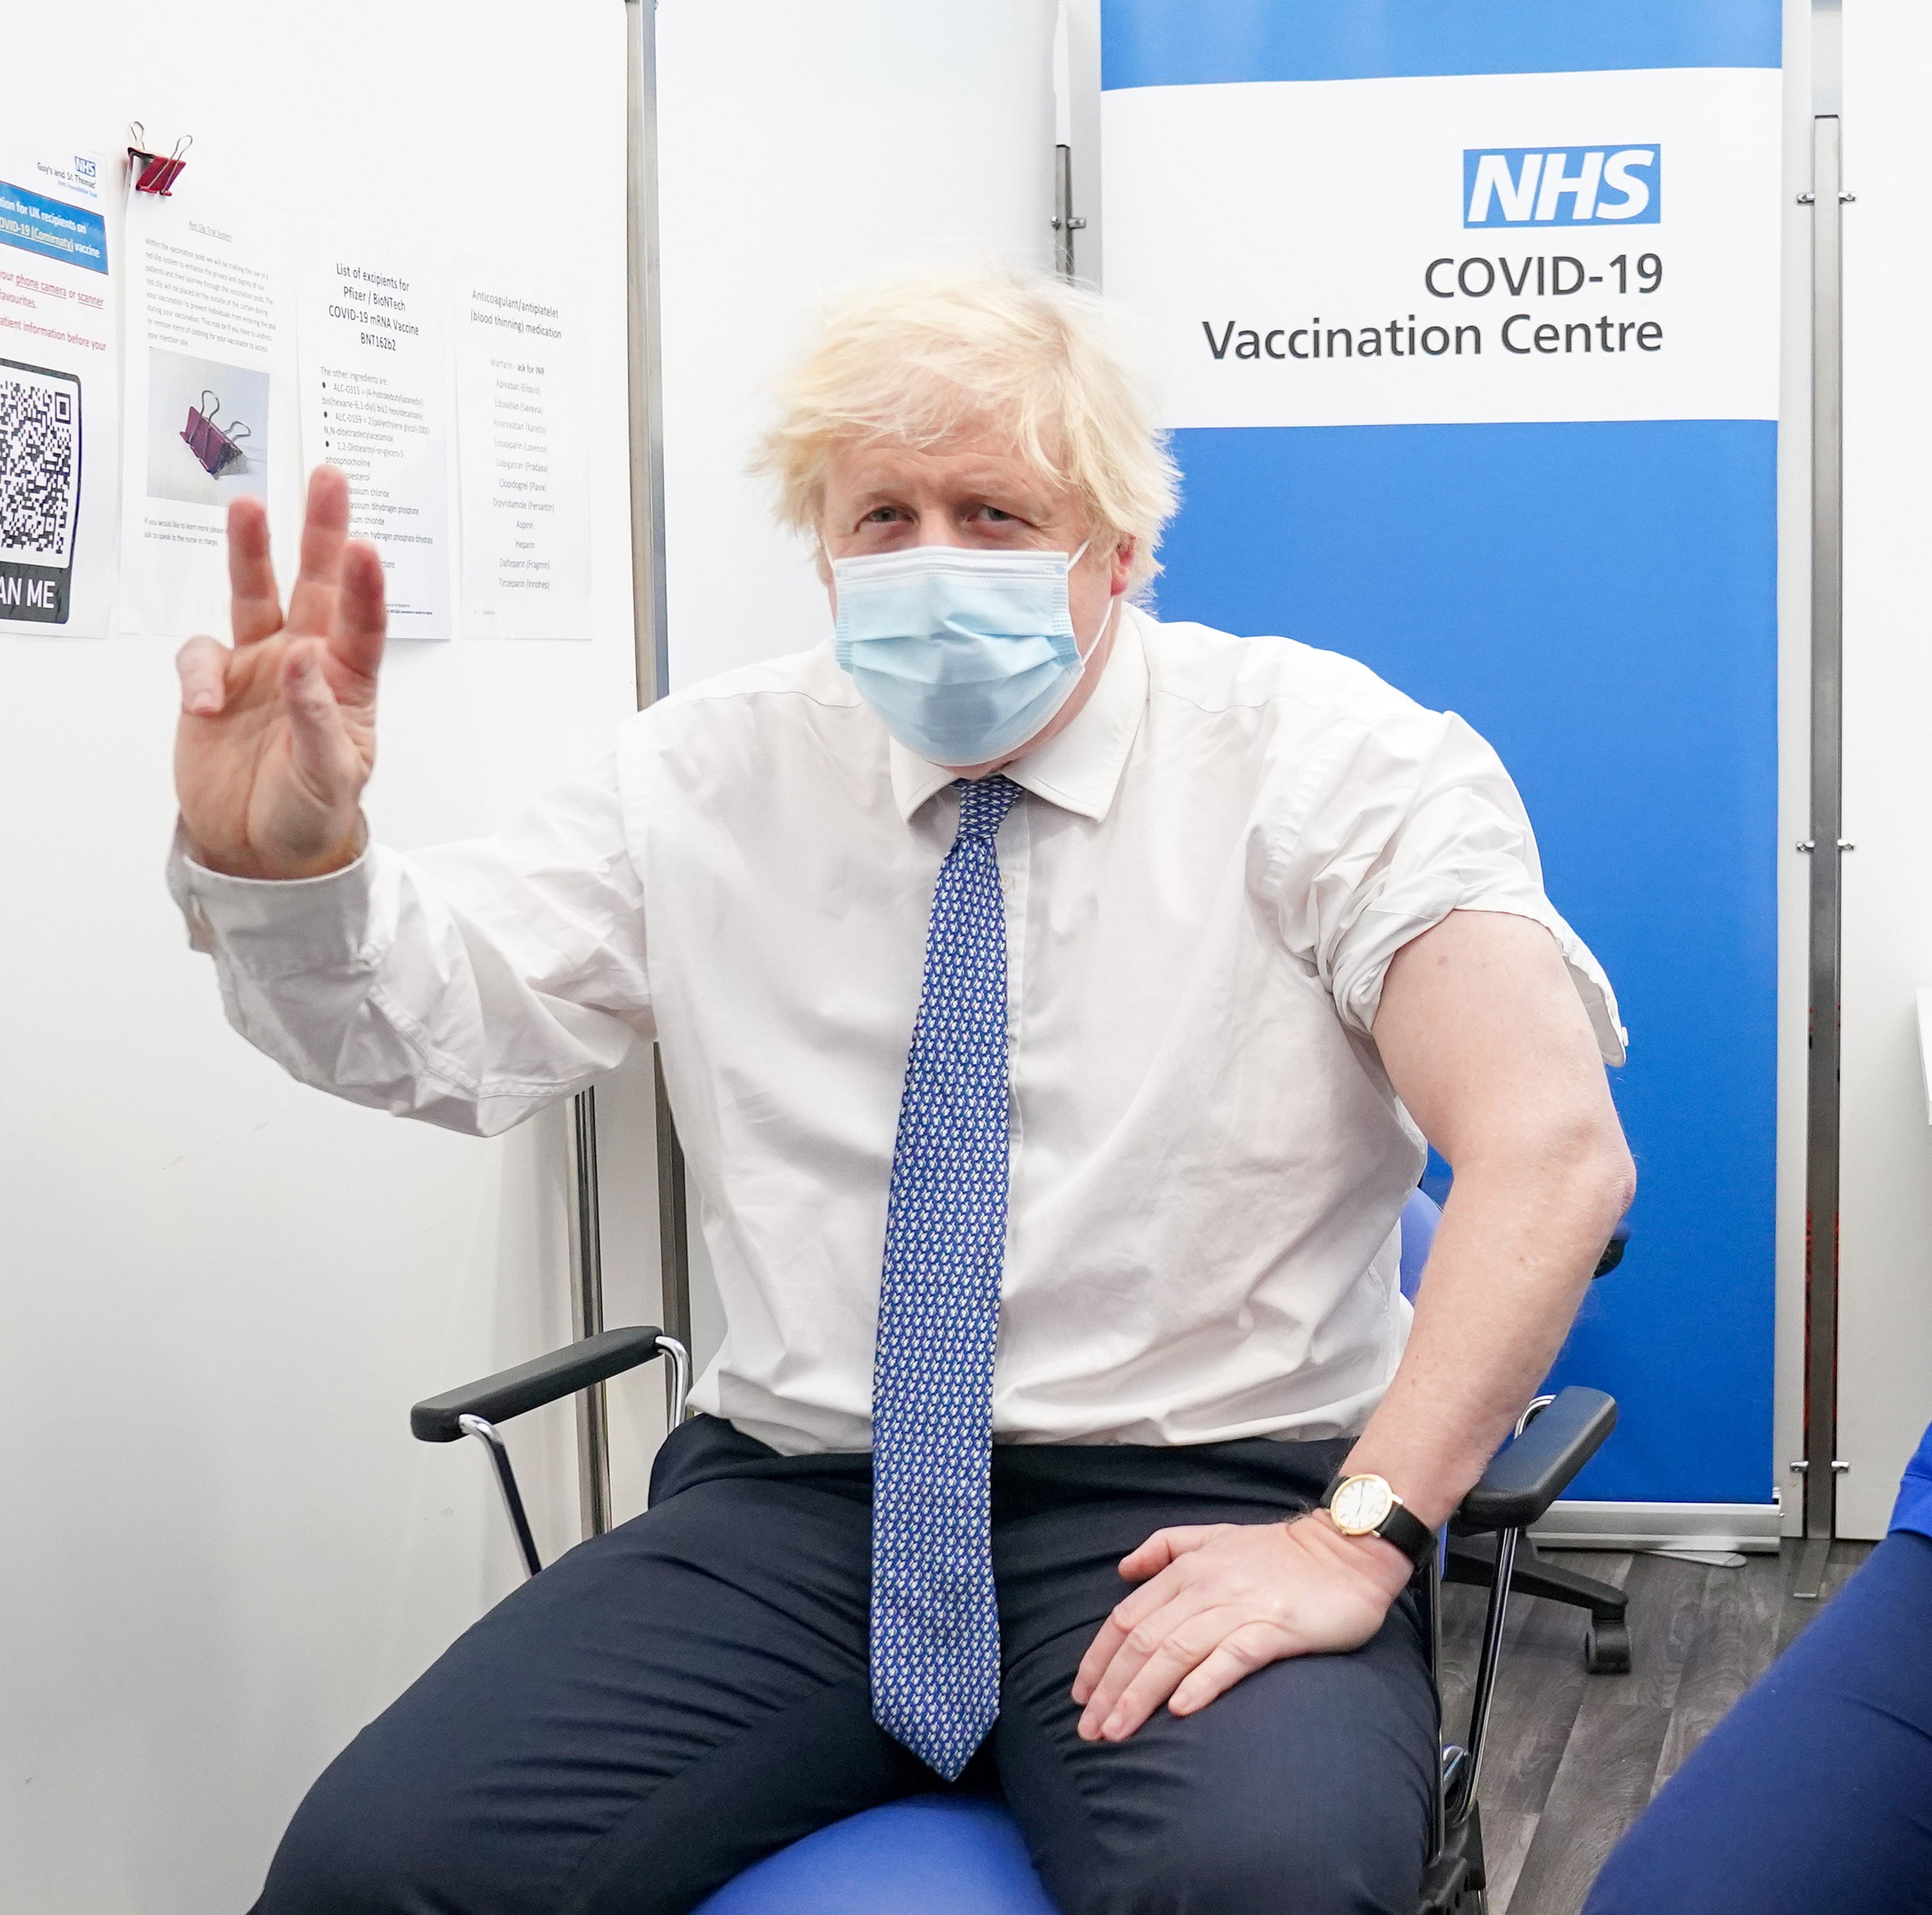 The prime minister gets his booster jab at St Thomas’ Hospital in London last week